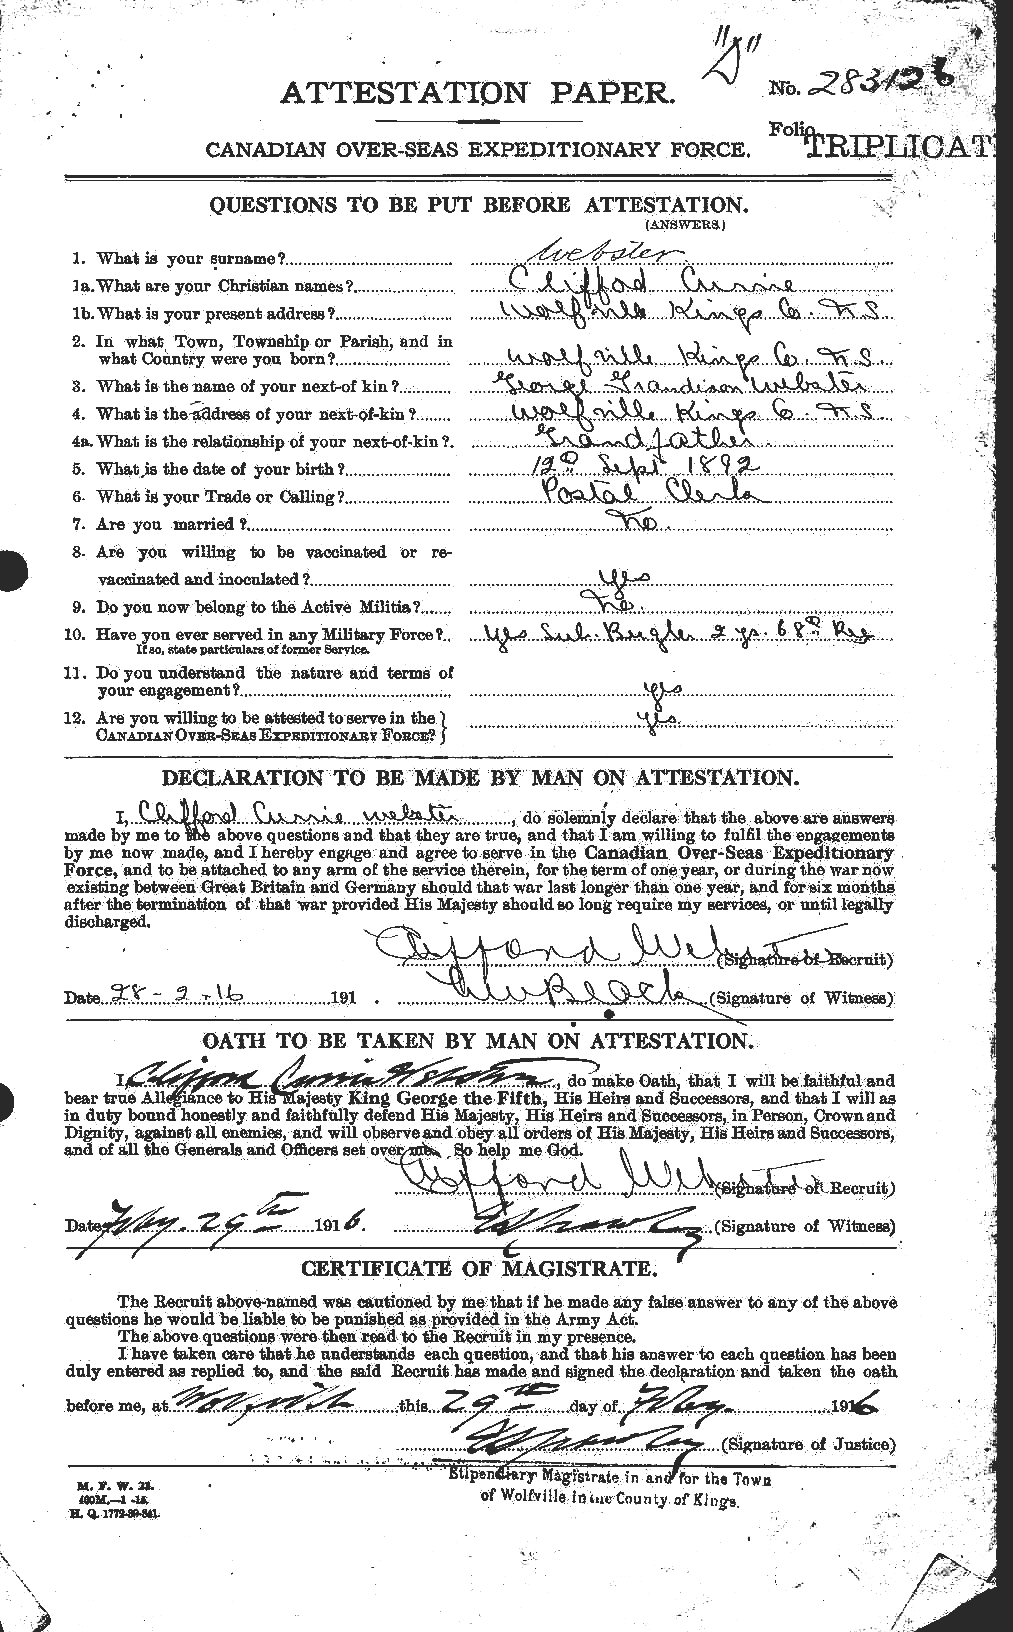 Personnel Records of the First World War - CEF 670305a